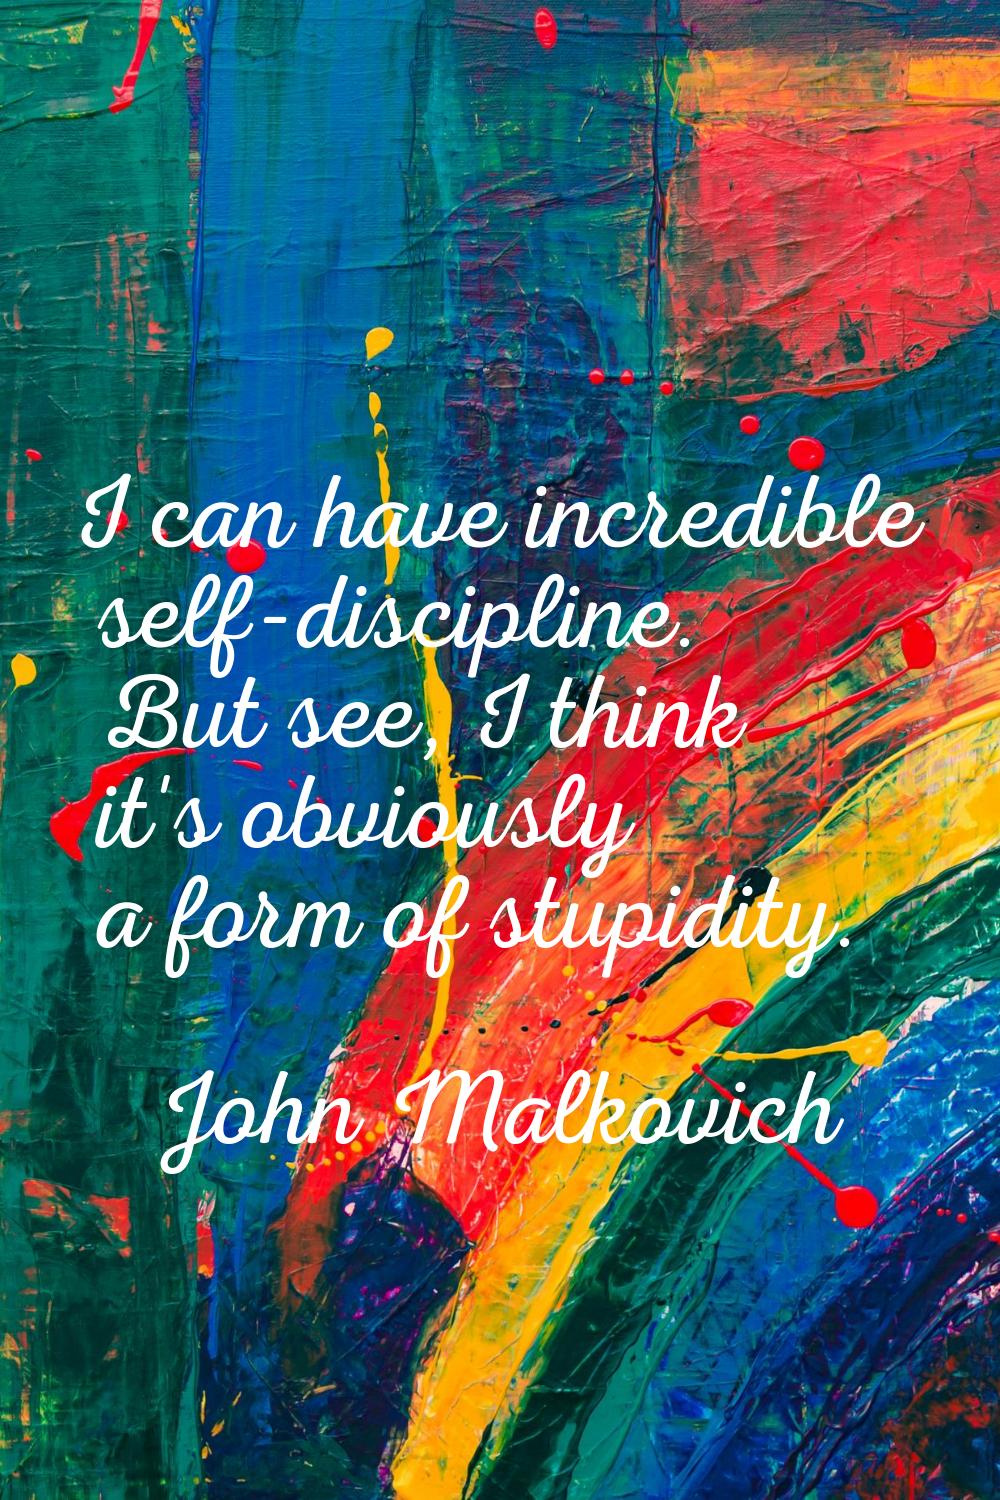 I can have incredible self-discipline. But see, I think it's obviously a form of stupidity.